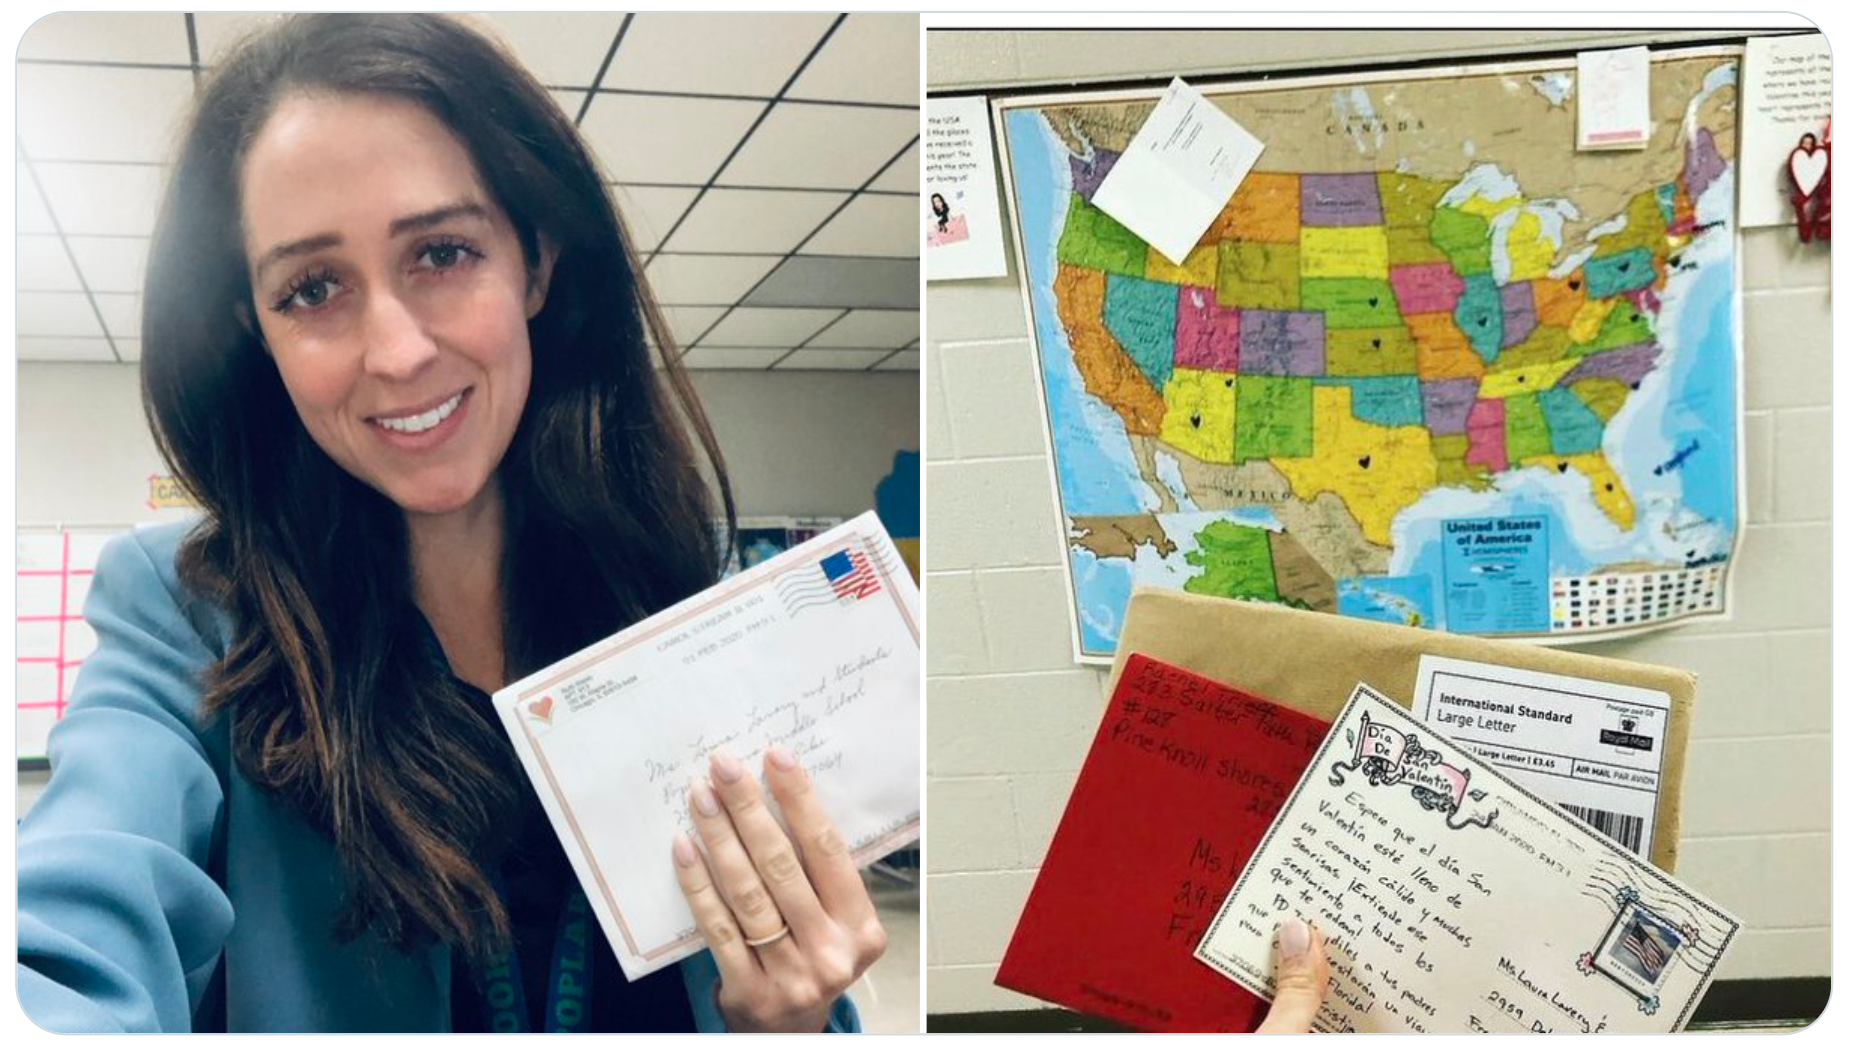 On the left, a woman holding a letter. On the right, a map of the U.S. and someone holding several letters.